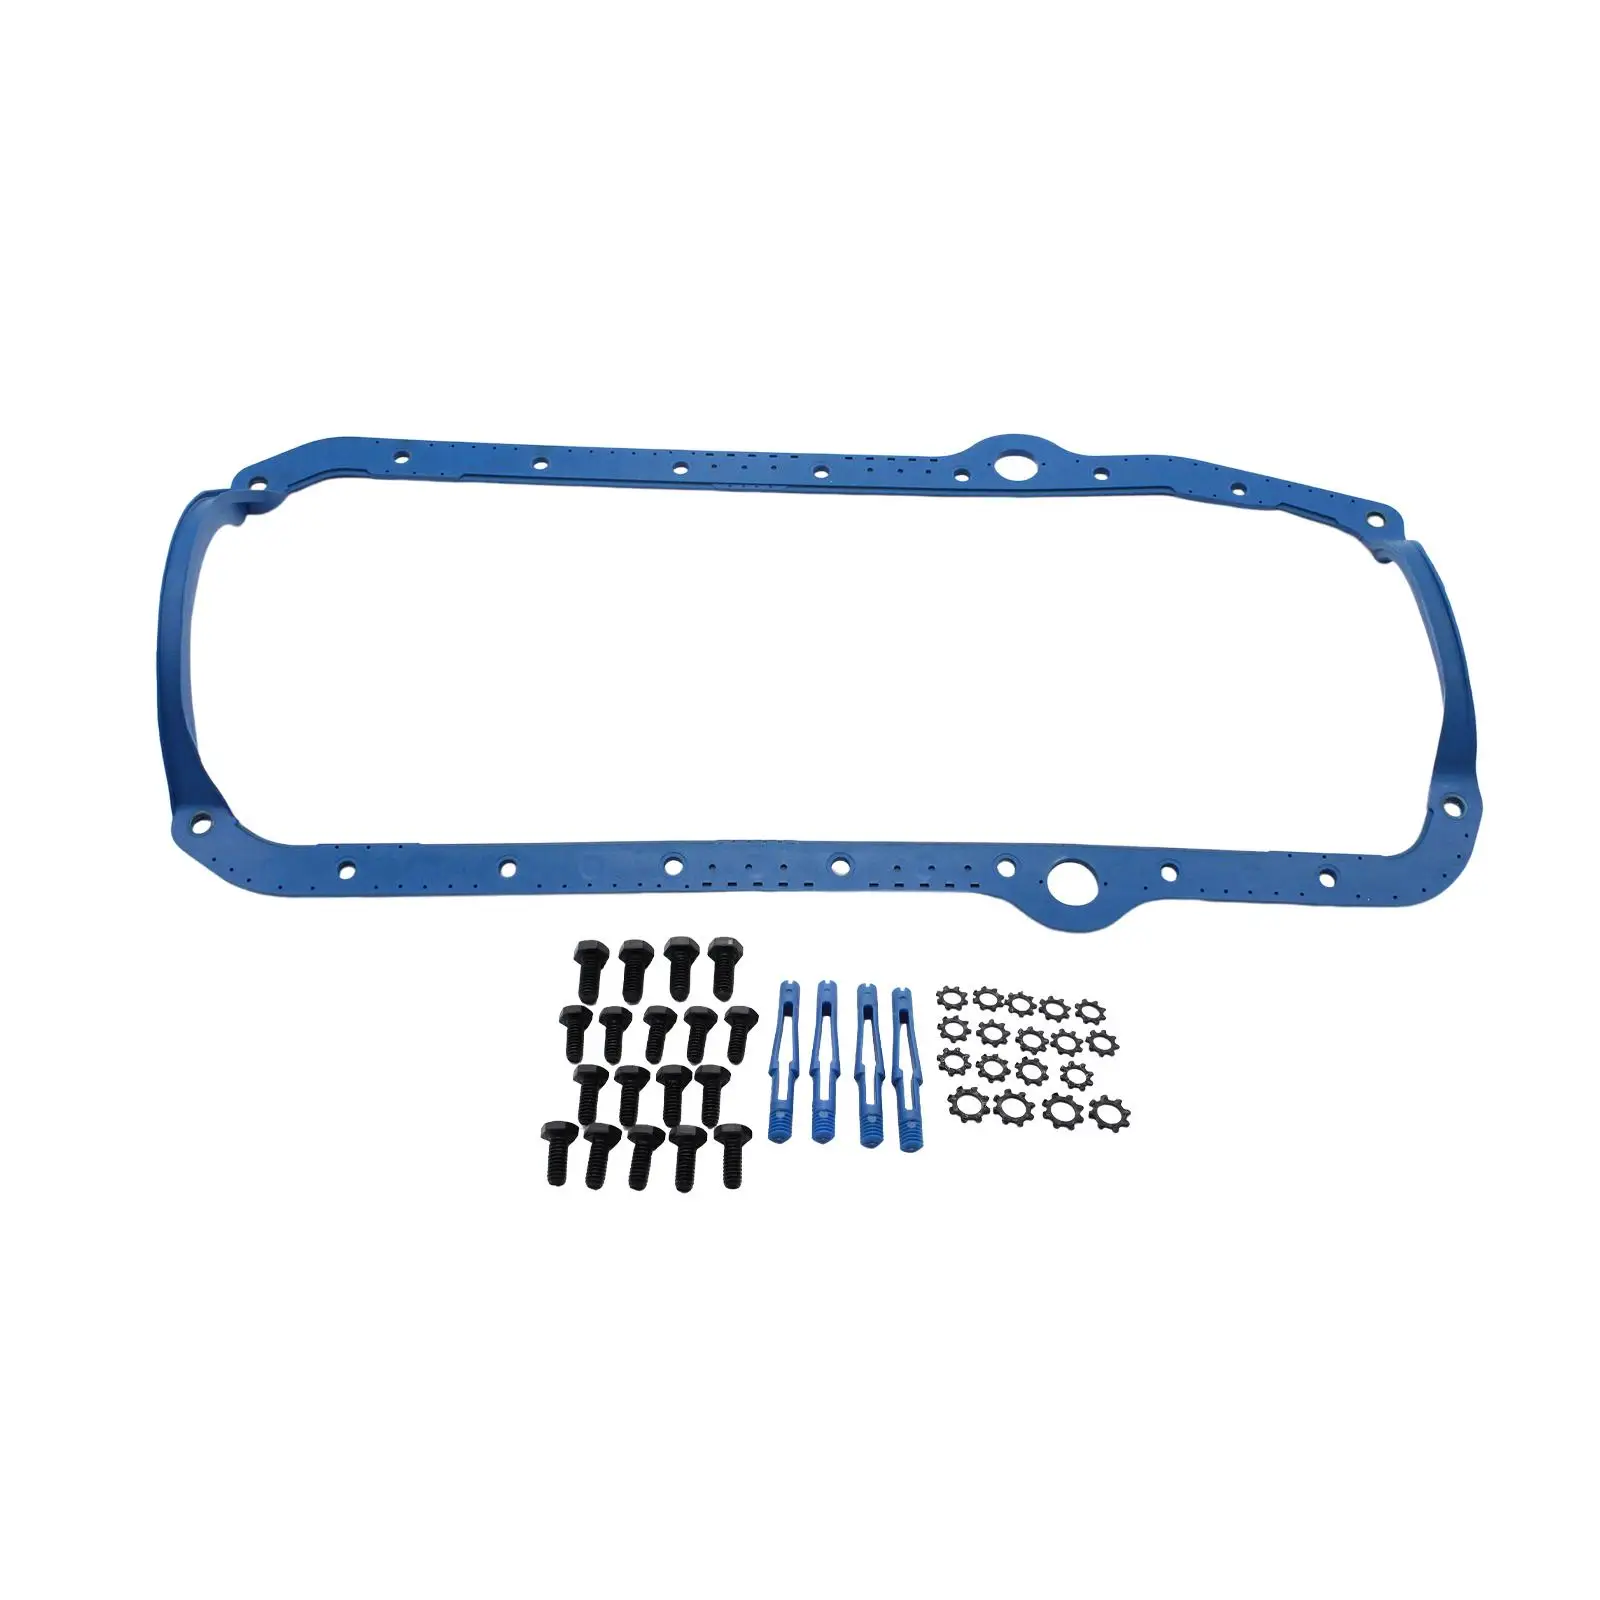 Oil Pan Gasket Set, OS34510T, Durable, High Performance, Premium Replacement